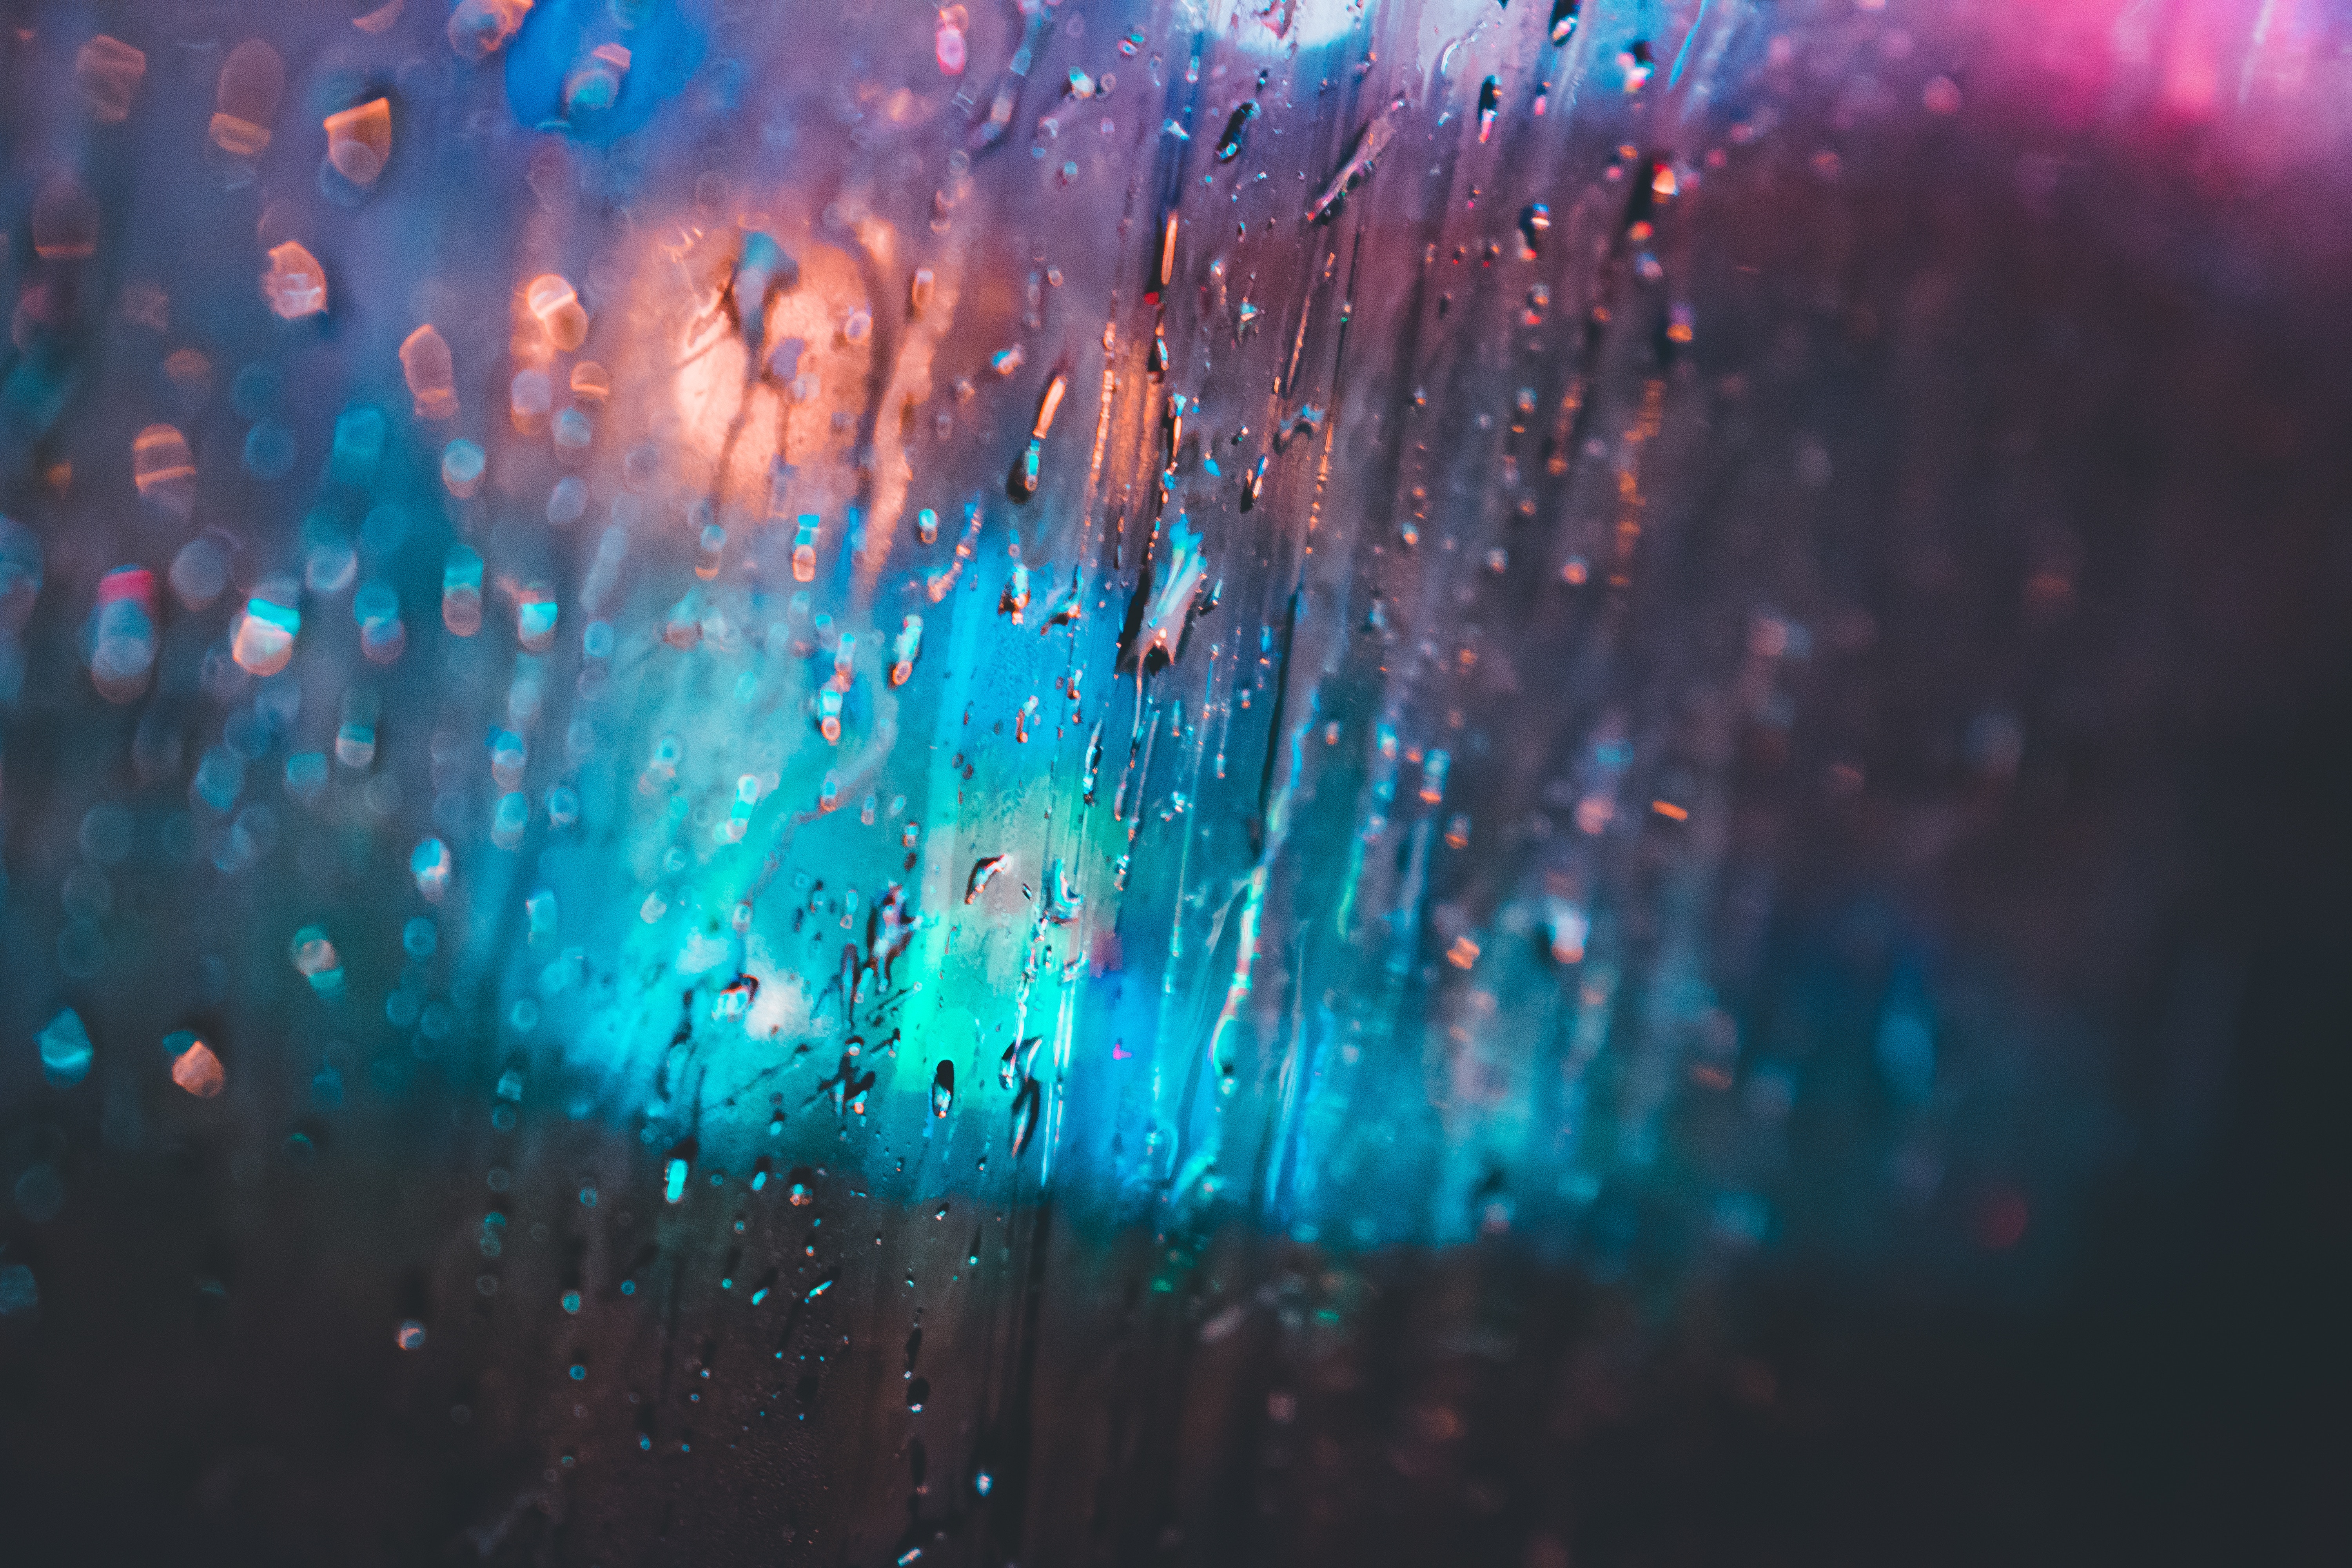 6000x4000 water, rain, window, color, wet, spring, abstract, winter, neon, blur, drop, car, blurred shot, colour, wallpaper, focu, moody, blurry, glass, cold, Free Gallery HD Wallpaper